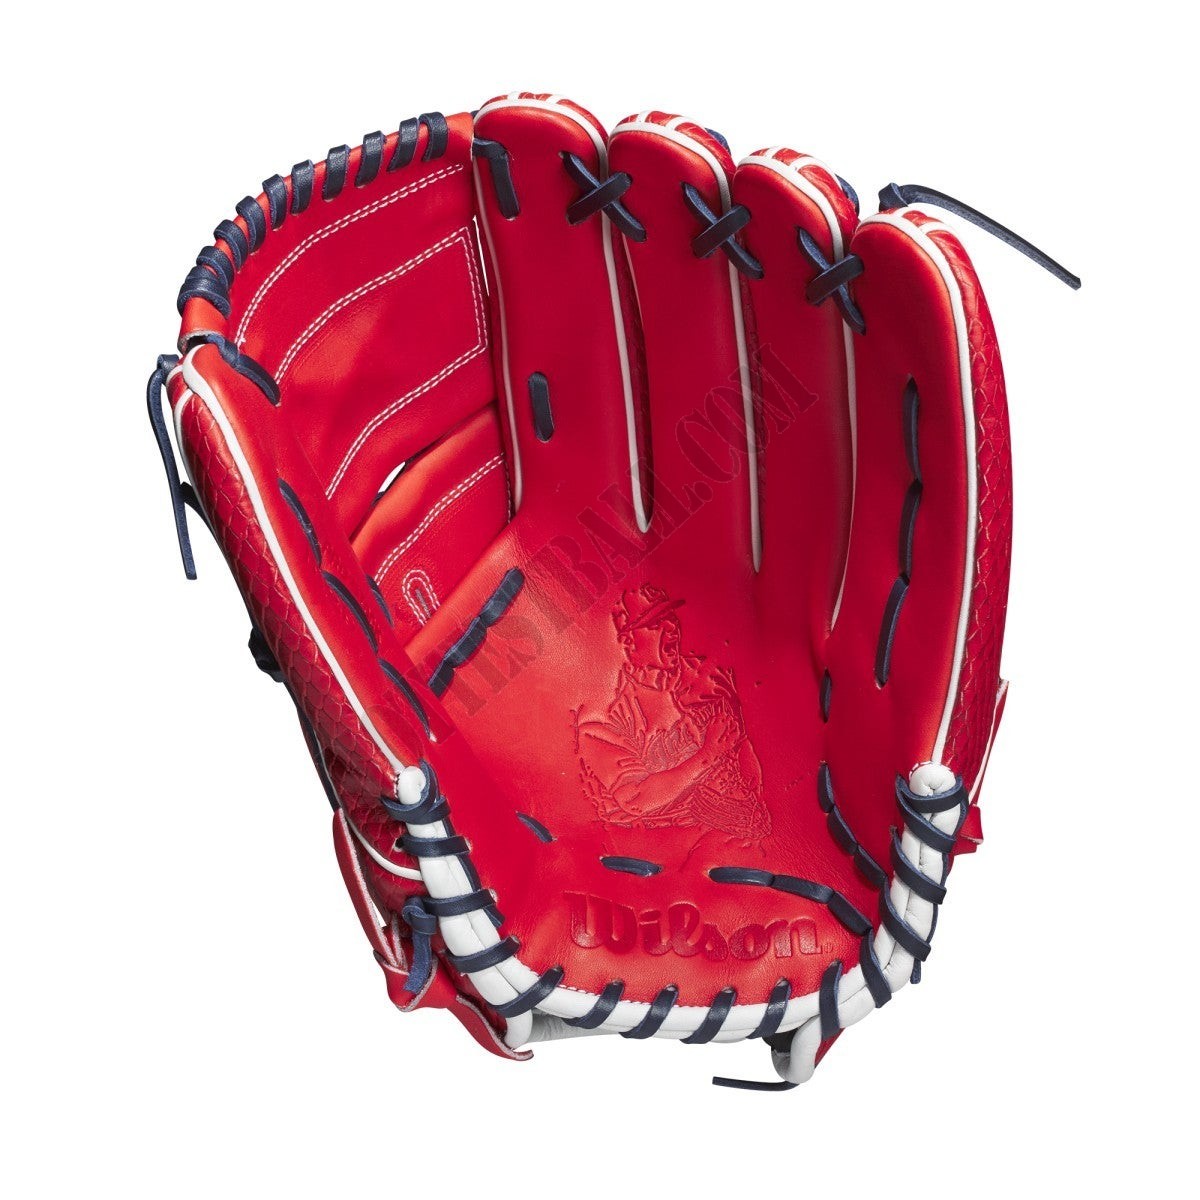 2021 A2000 B125 12.5" Carlos Carrasco Game Model Pitcher's Baseball Glove ● Wilson Promotions - -2